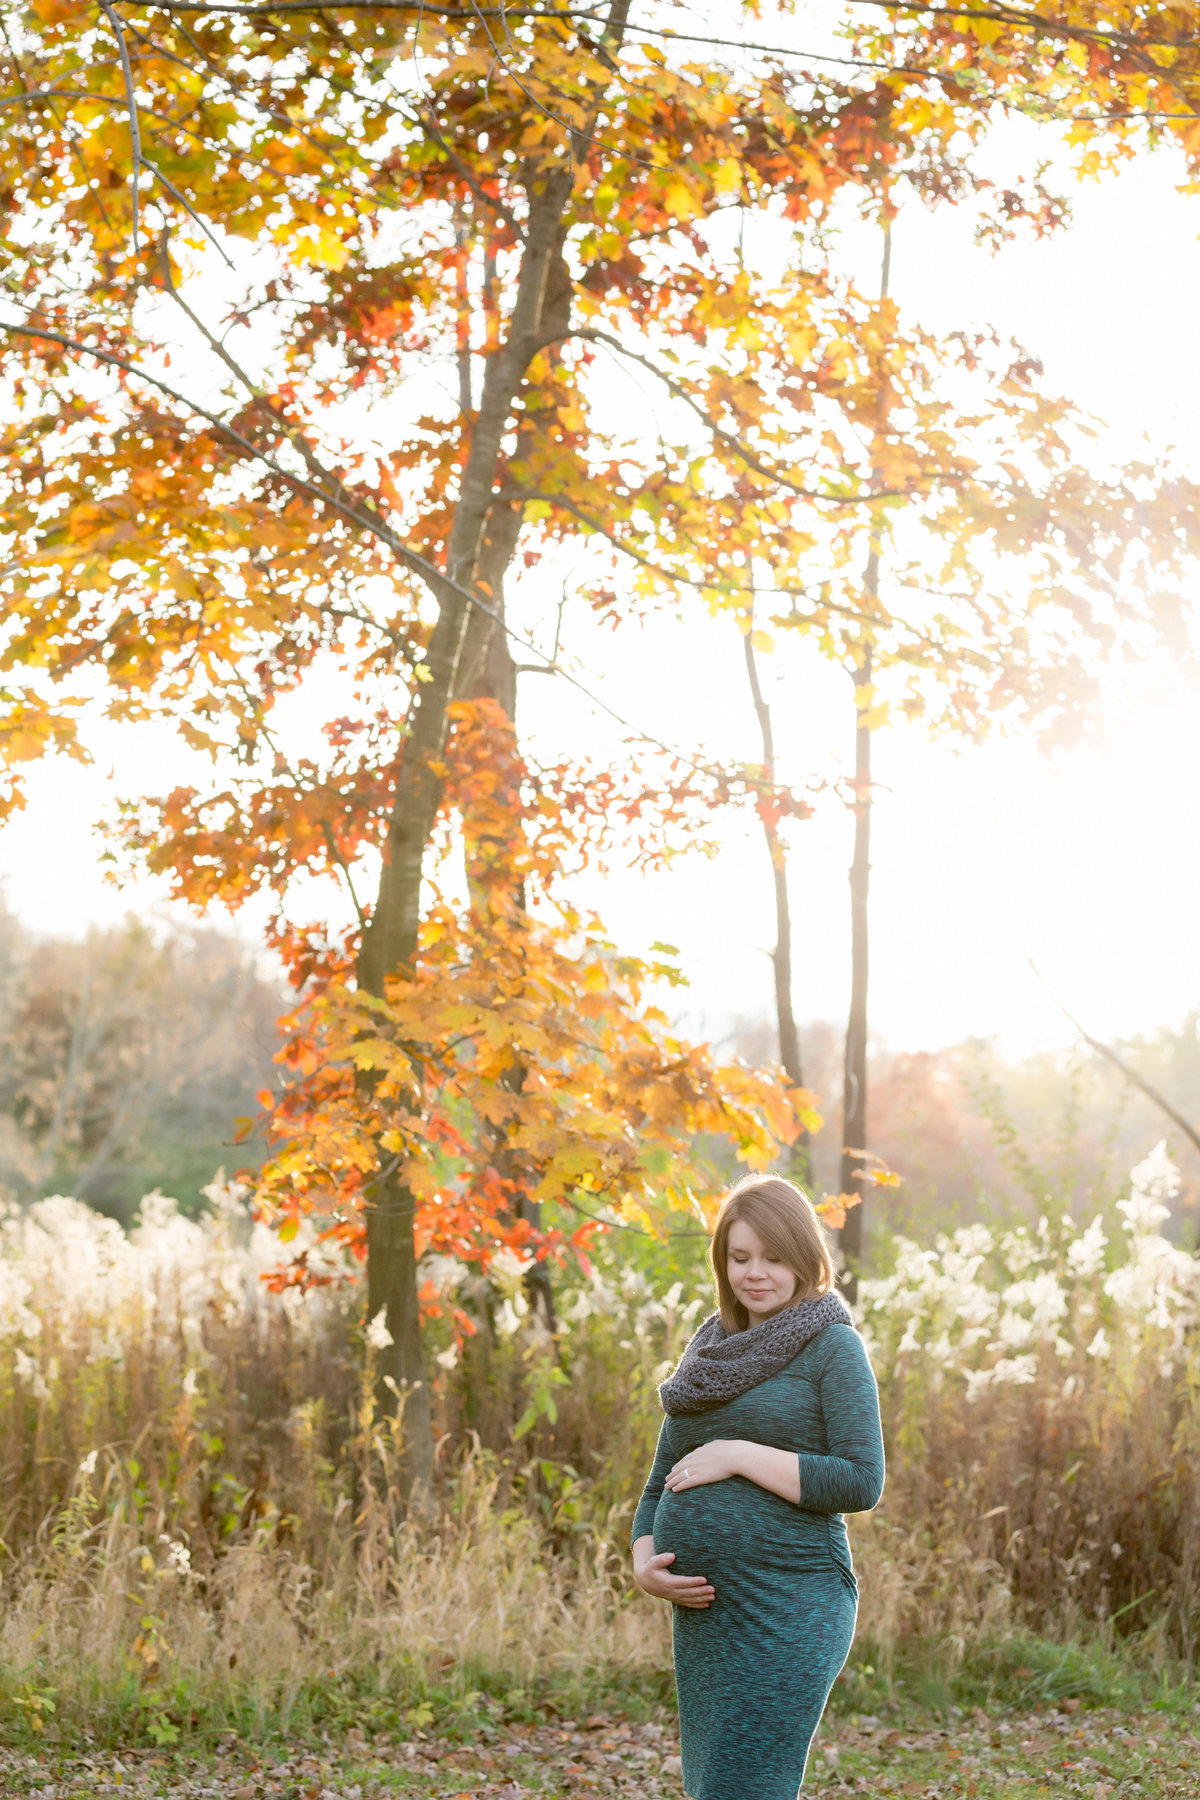 Maternity session in the fall - Jen Madigan - Naperville IL Maternity photographer